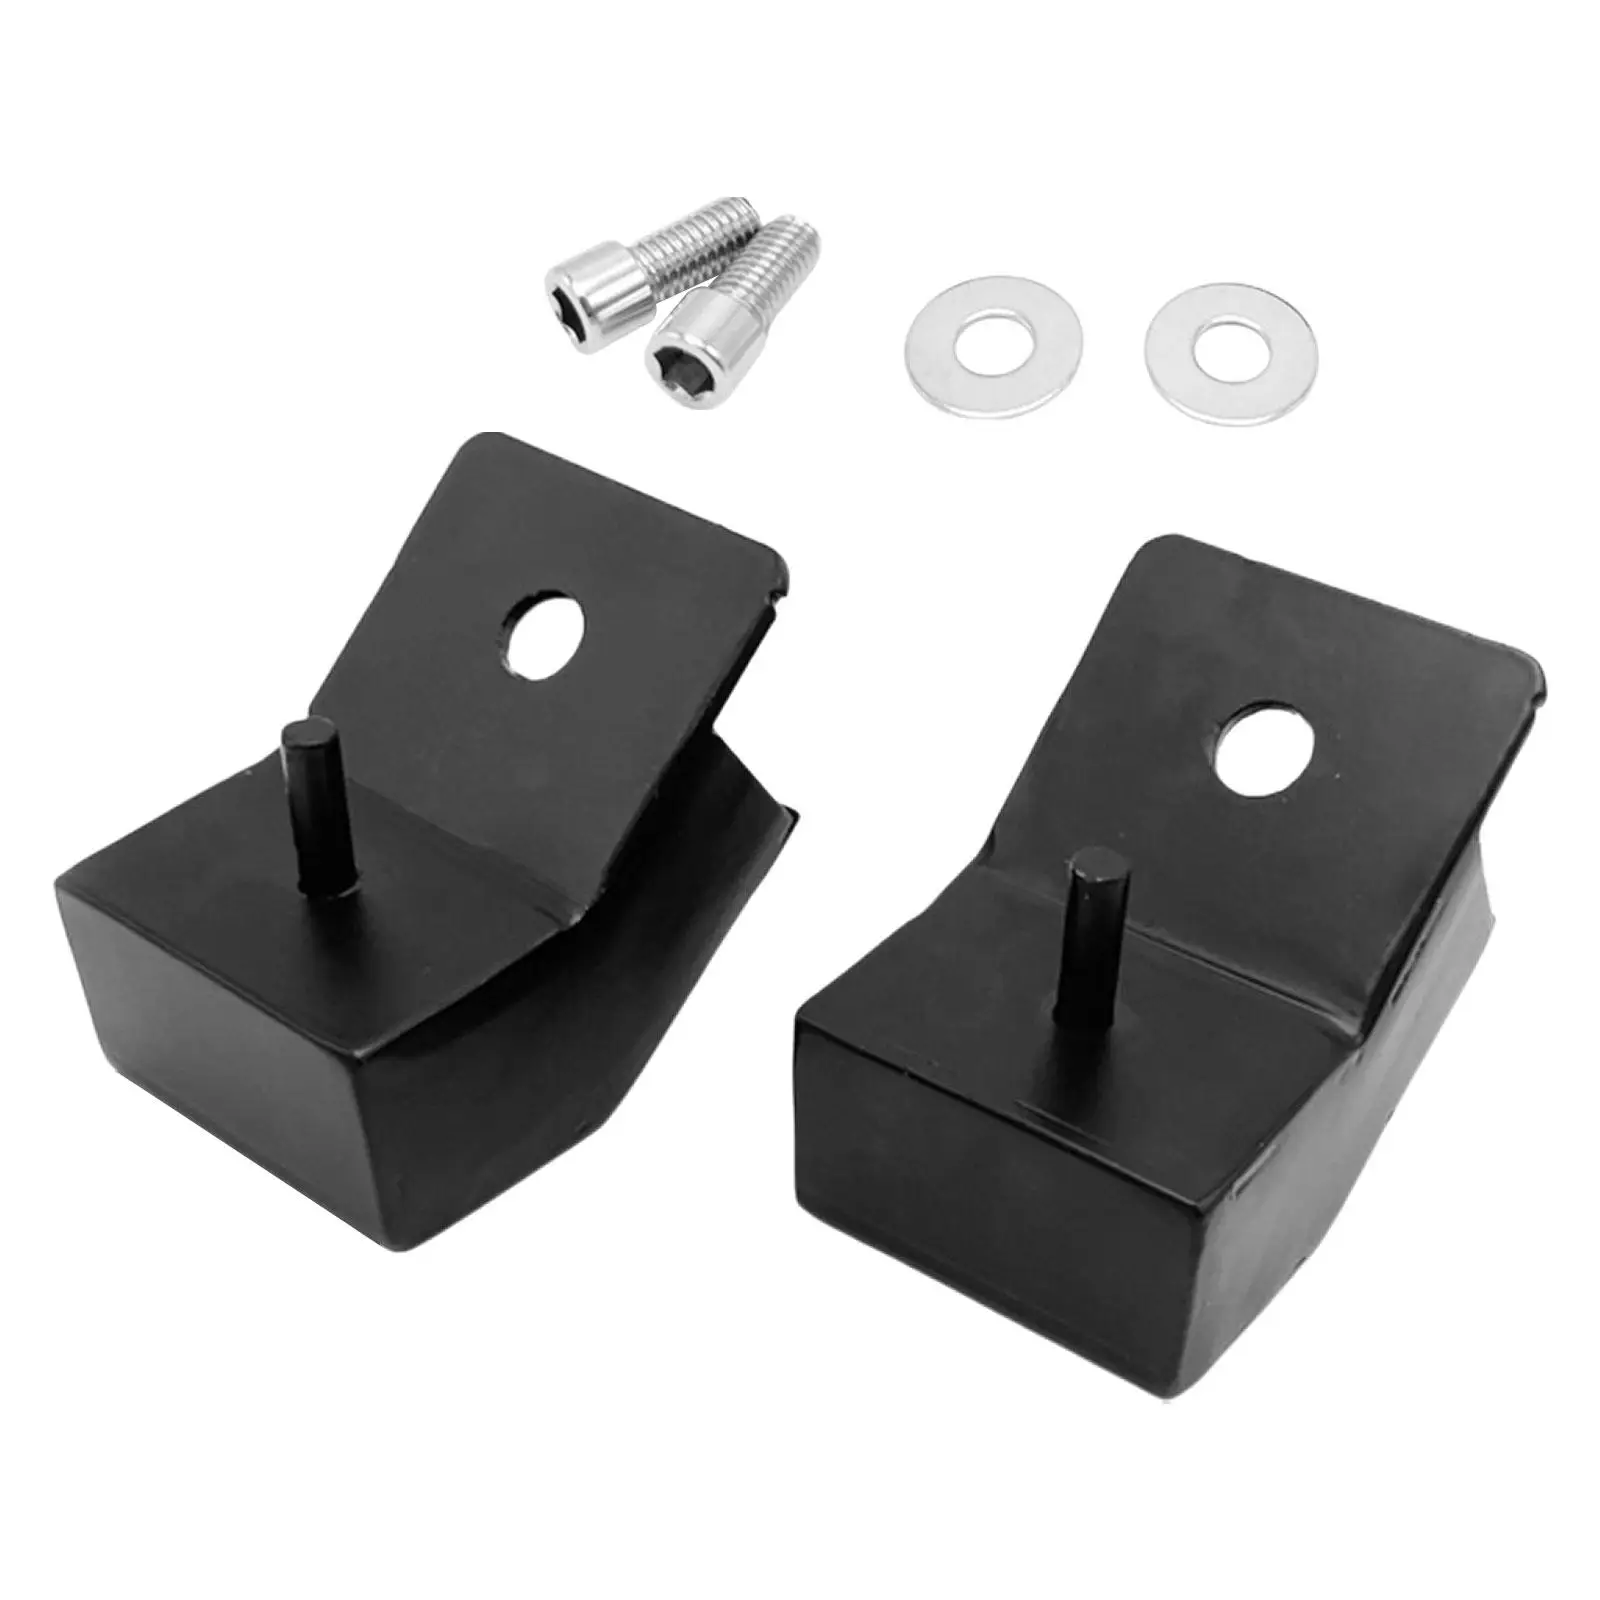 Front Seat Jackers Replaces Spare Parts Front Seat Spacers Jackers Kit Front Seat Cushion Kit for Toyota for tacoma